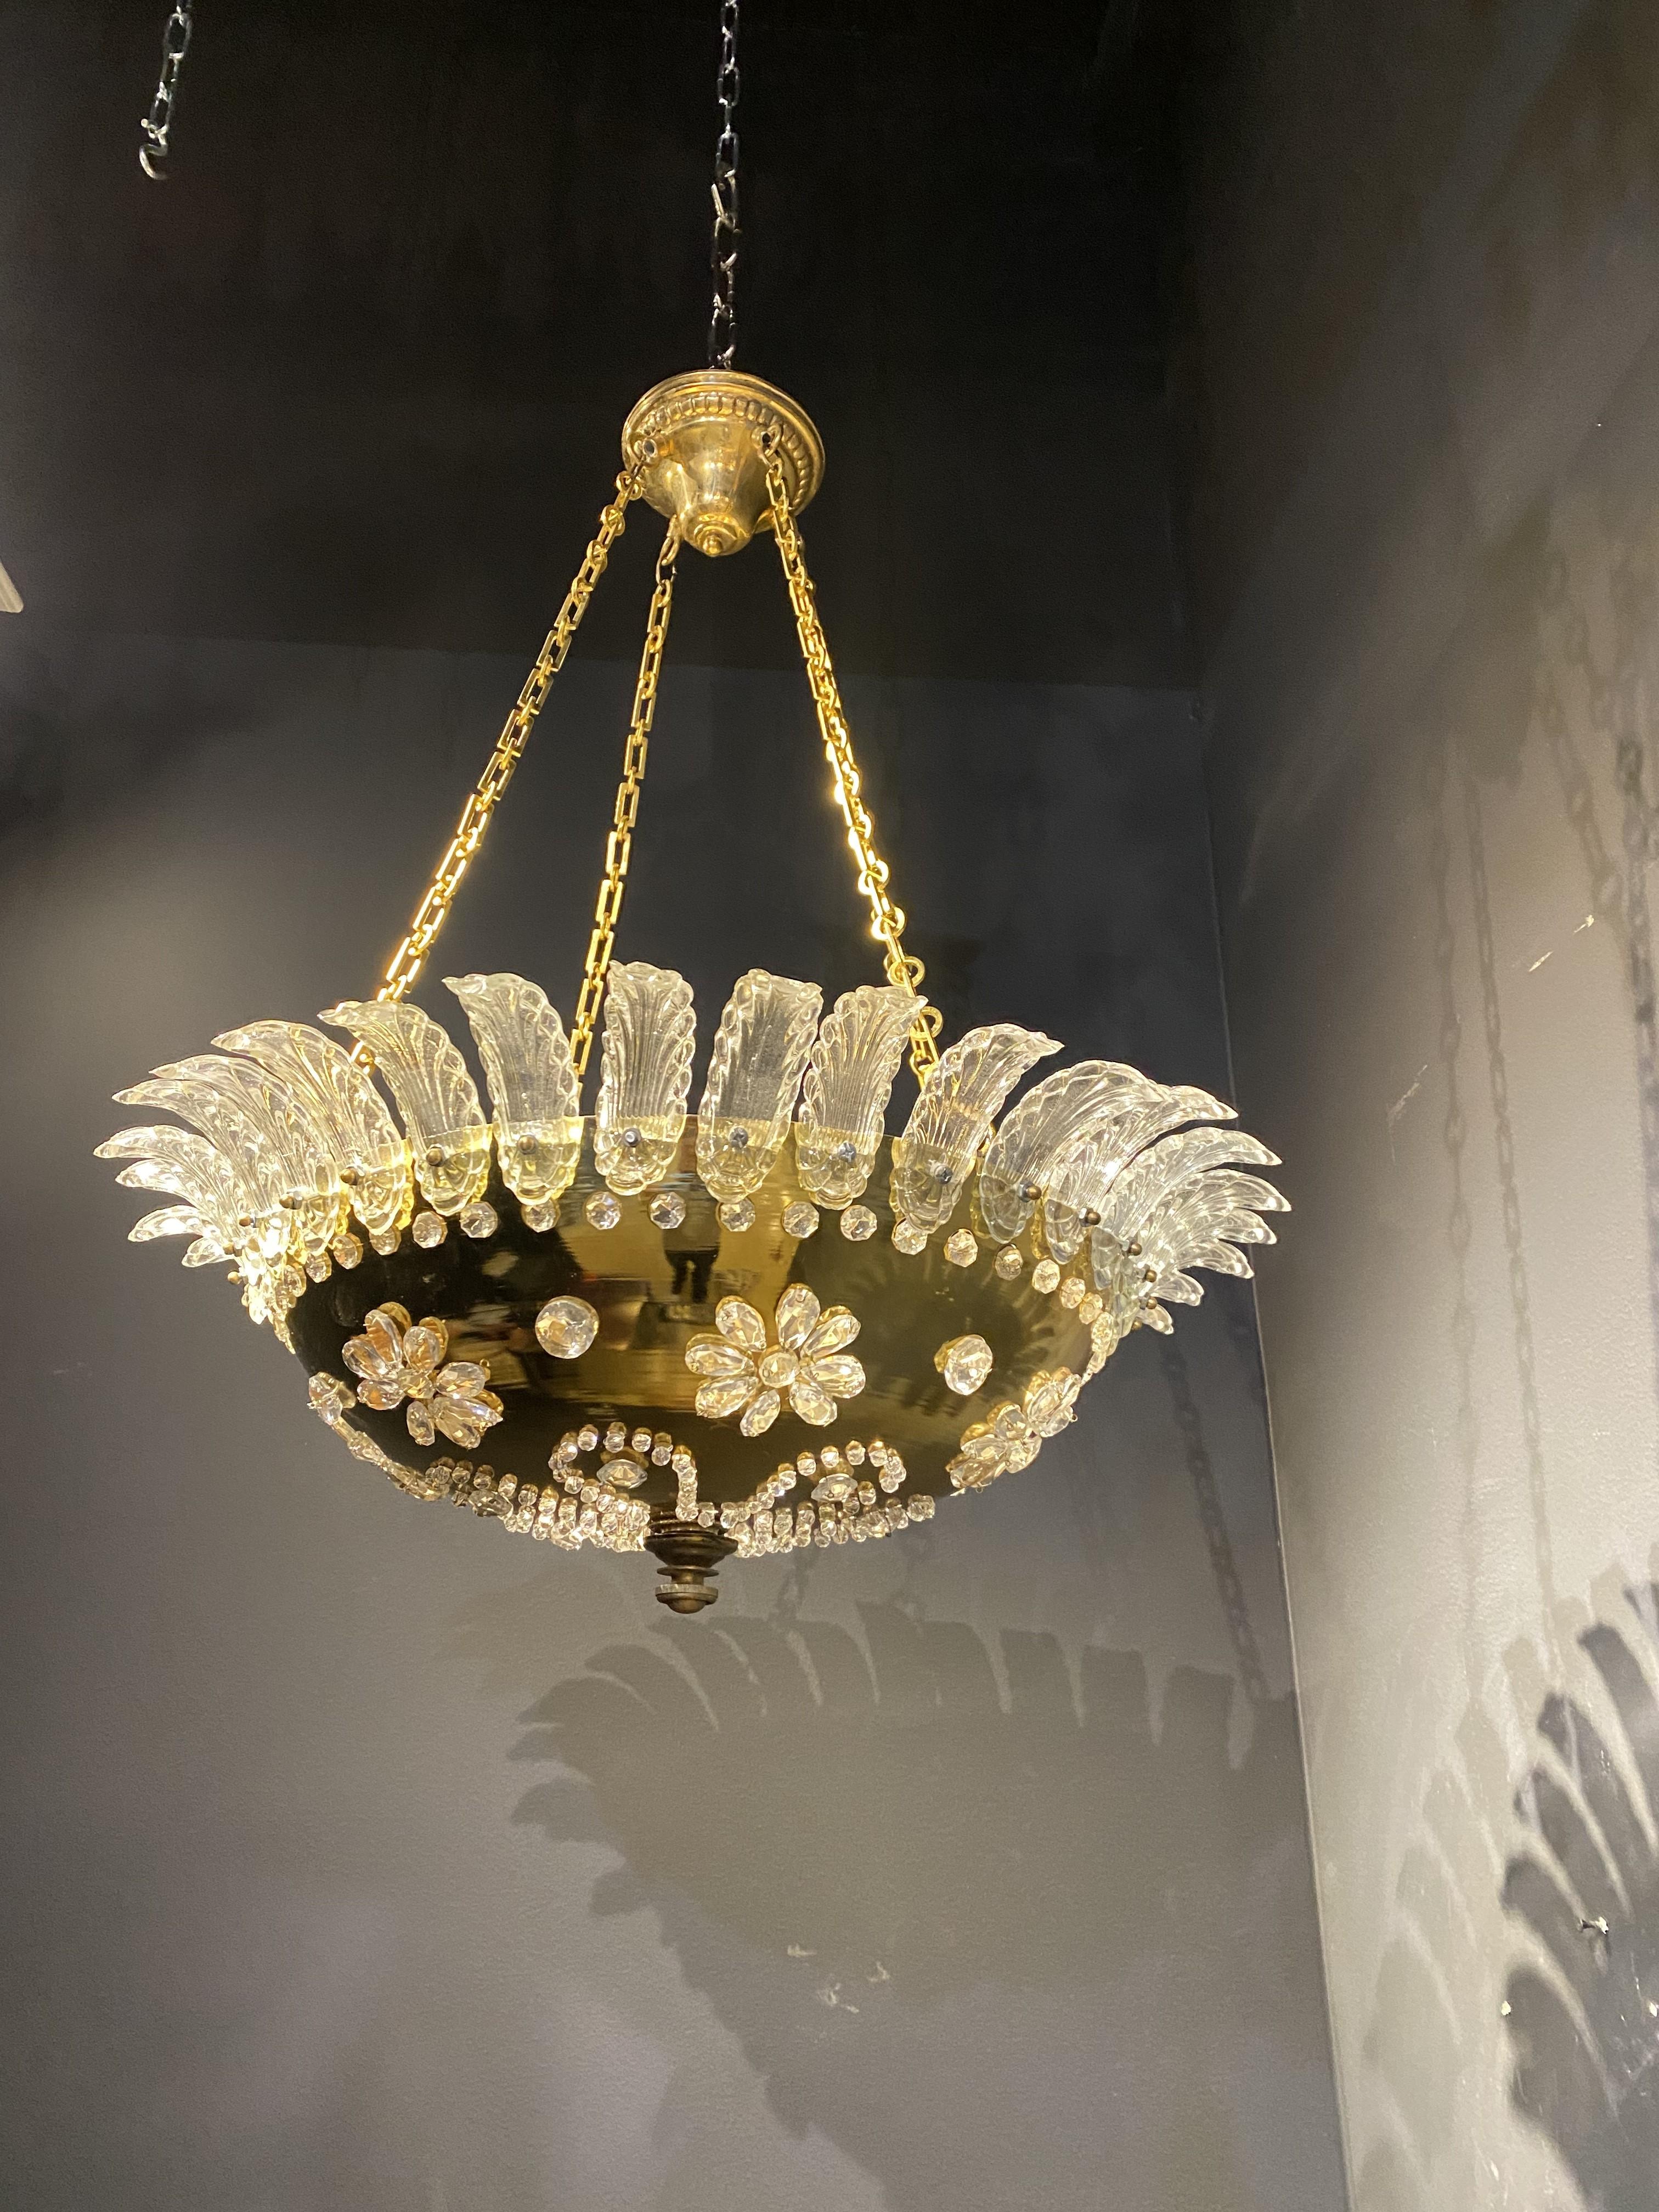 A circa 1930's French Bagues gilt bronze light fixture with crystals inset.